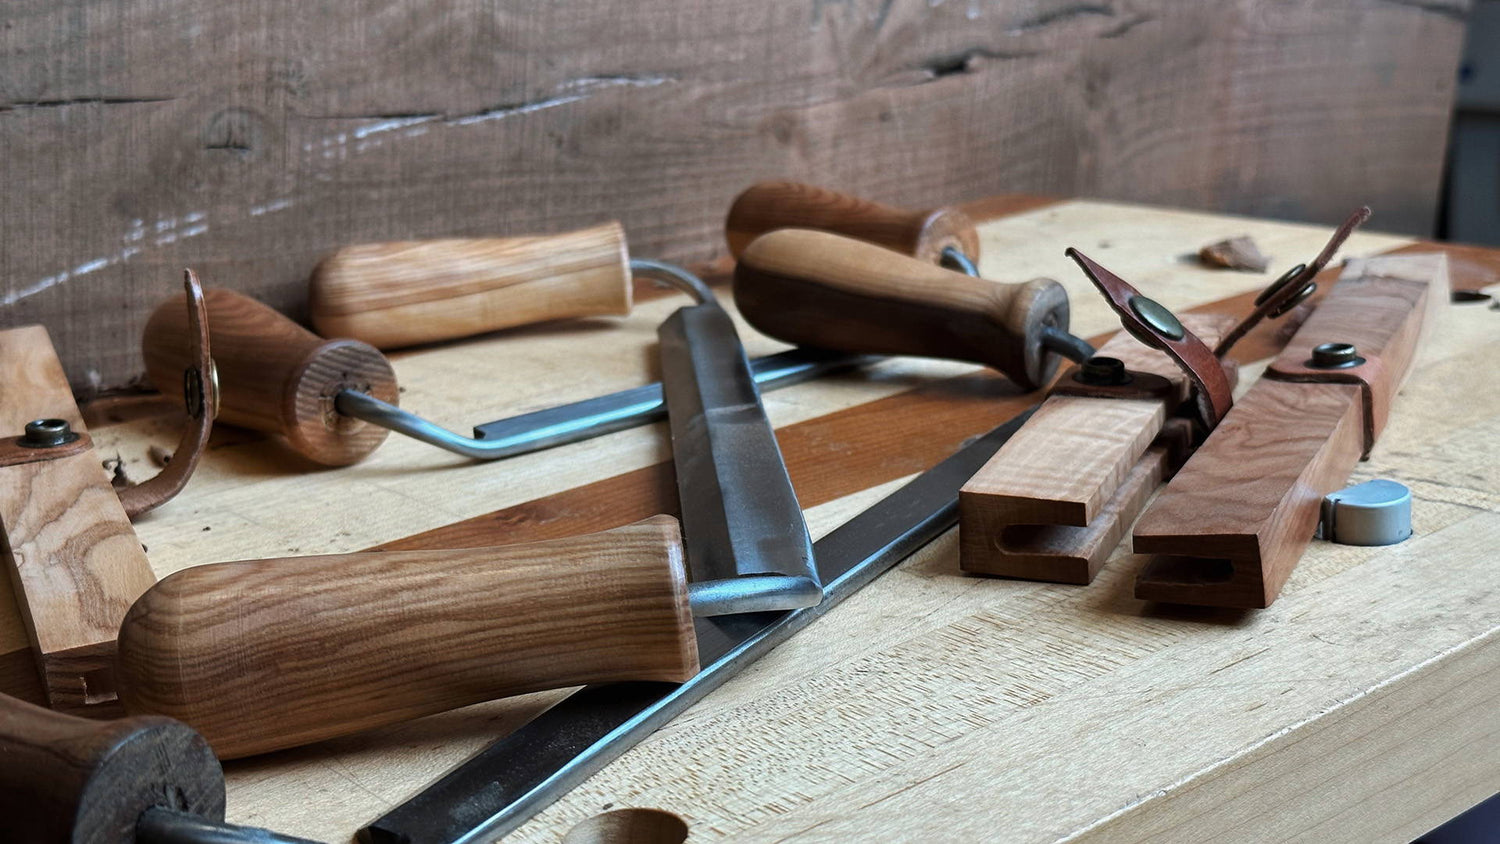 Japan Woodworker - Hand Tools, Gardening, and Fine Cutlery - Woodcraft